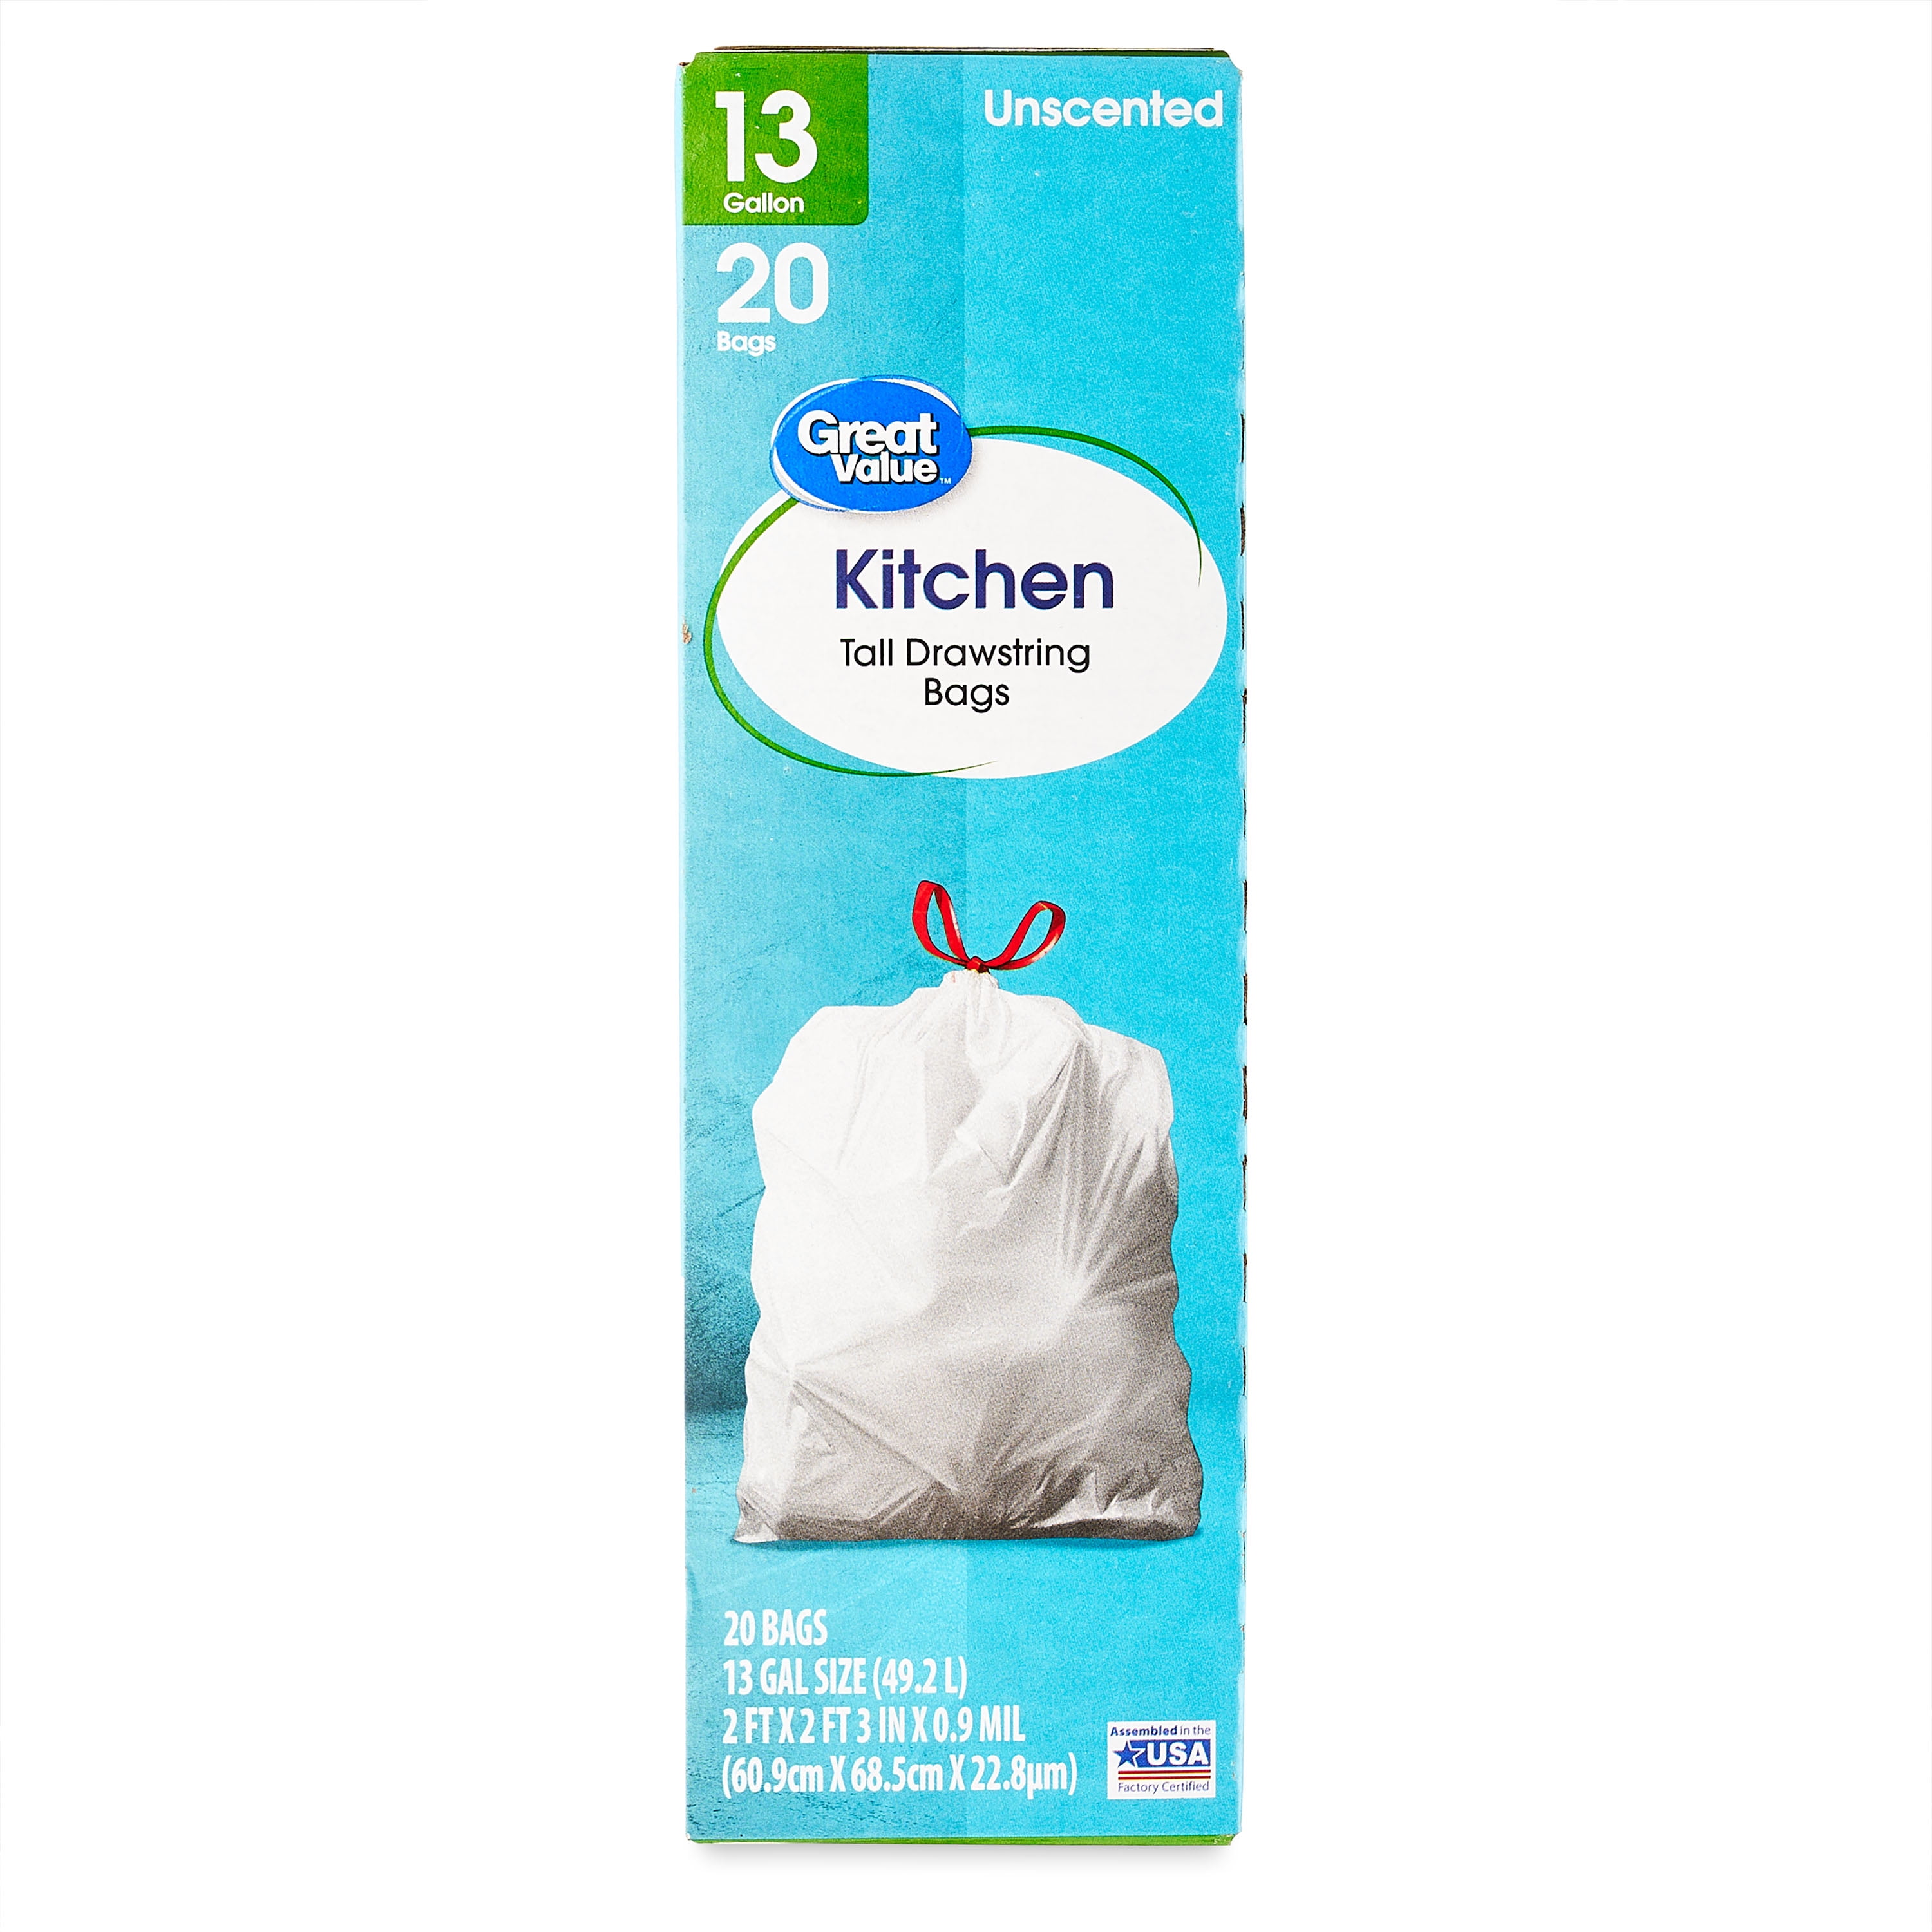 Basics Tall Kitchen Drawstring Trash Bags, 13 Gallon, Unscented, 200  Count (Previously Solimo)